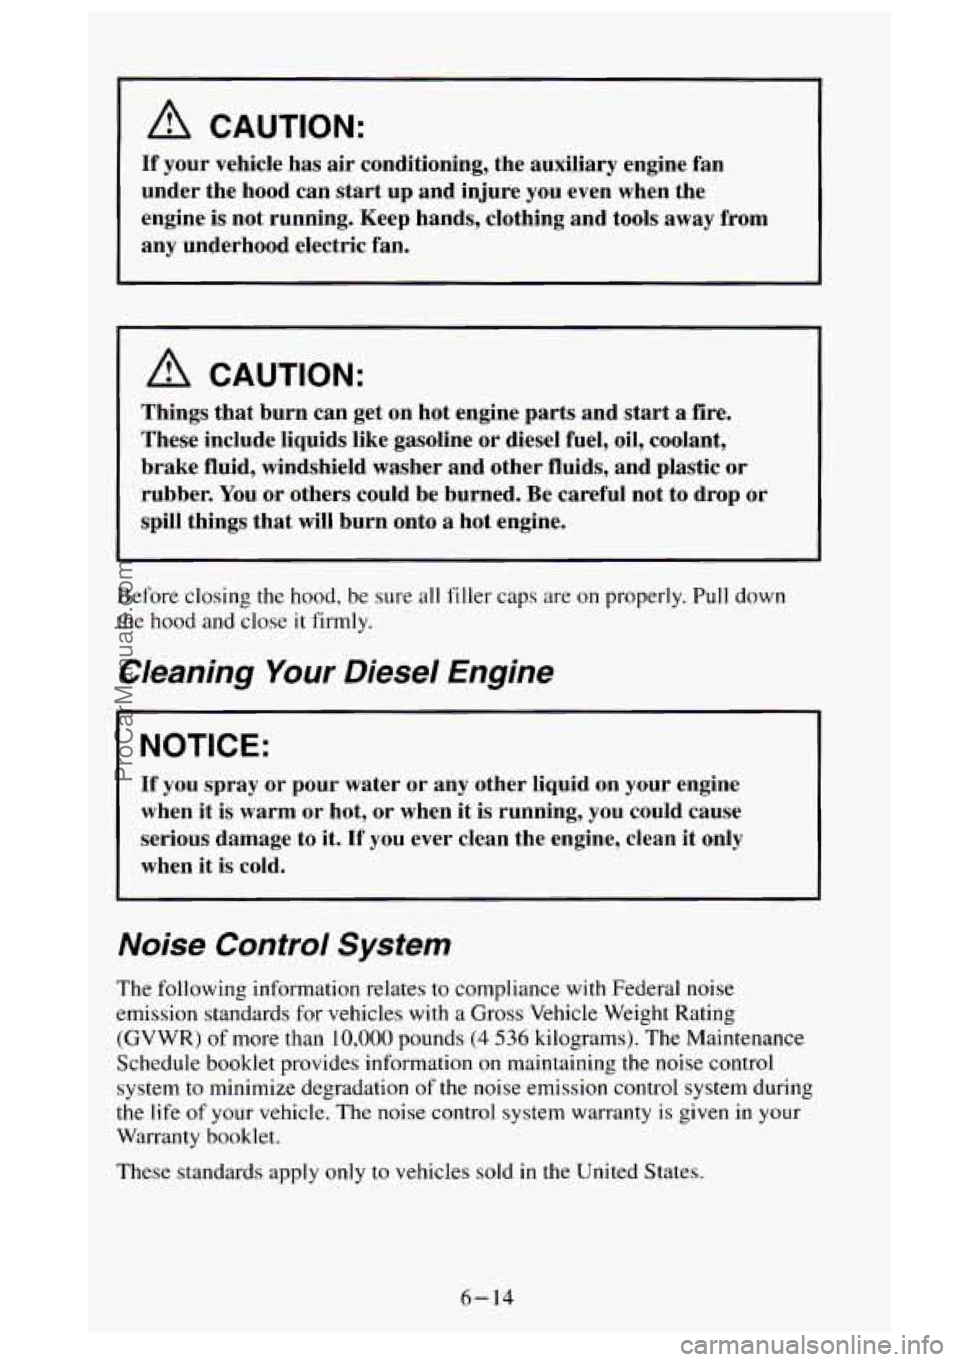 GMC SIERRA 1995  Owners Manual A CAUTION: 
If your  vehicle  has  air  conditioning,  the  auxiliary  engine  fan 
under  the  hood  can  start  up  and  injure  you  even  when  the 
engine  is  not  running.  Keep  hands,  clothi